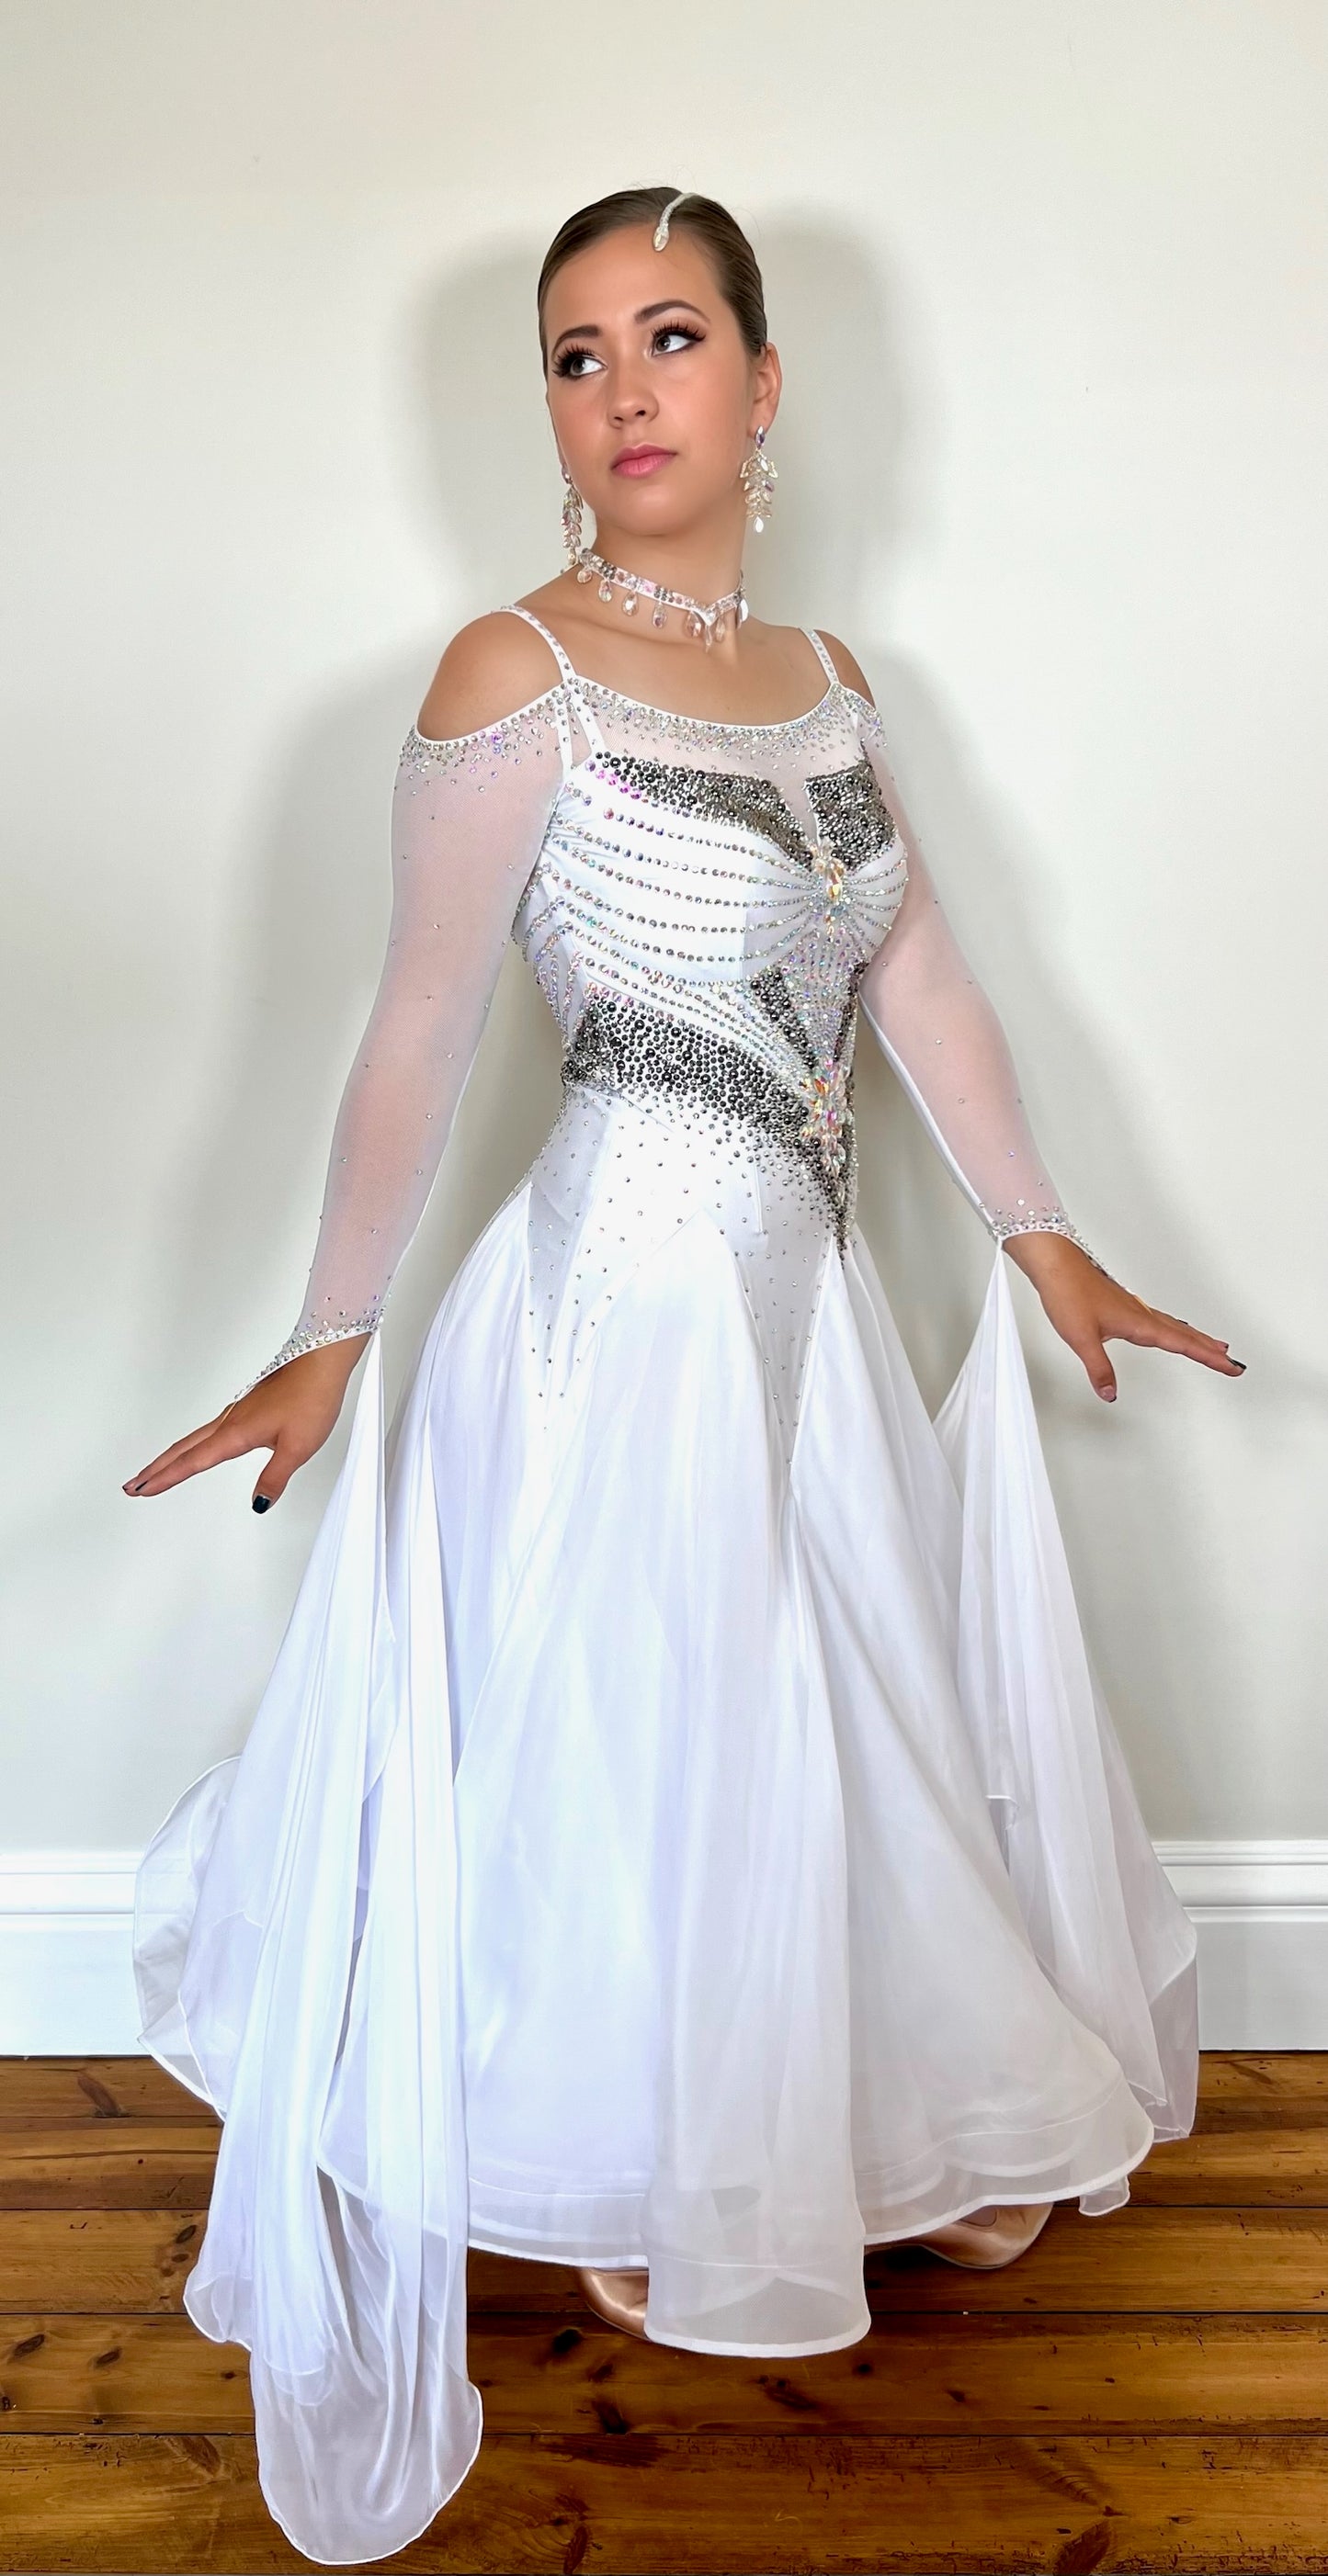 325 white Ballroom Dress decorated with Silver & AB stones. Strapping detail to the back & cold shoulder sleeves. Floats to the wrist.